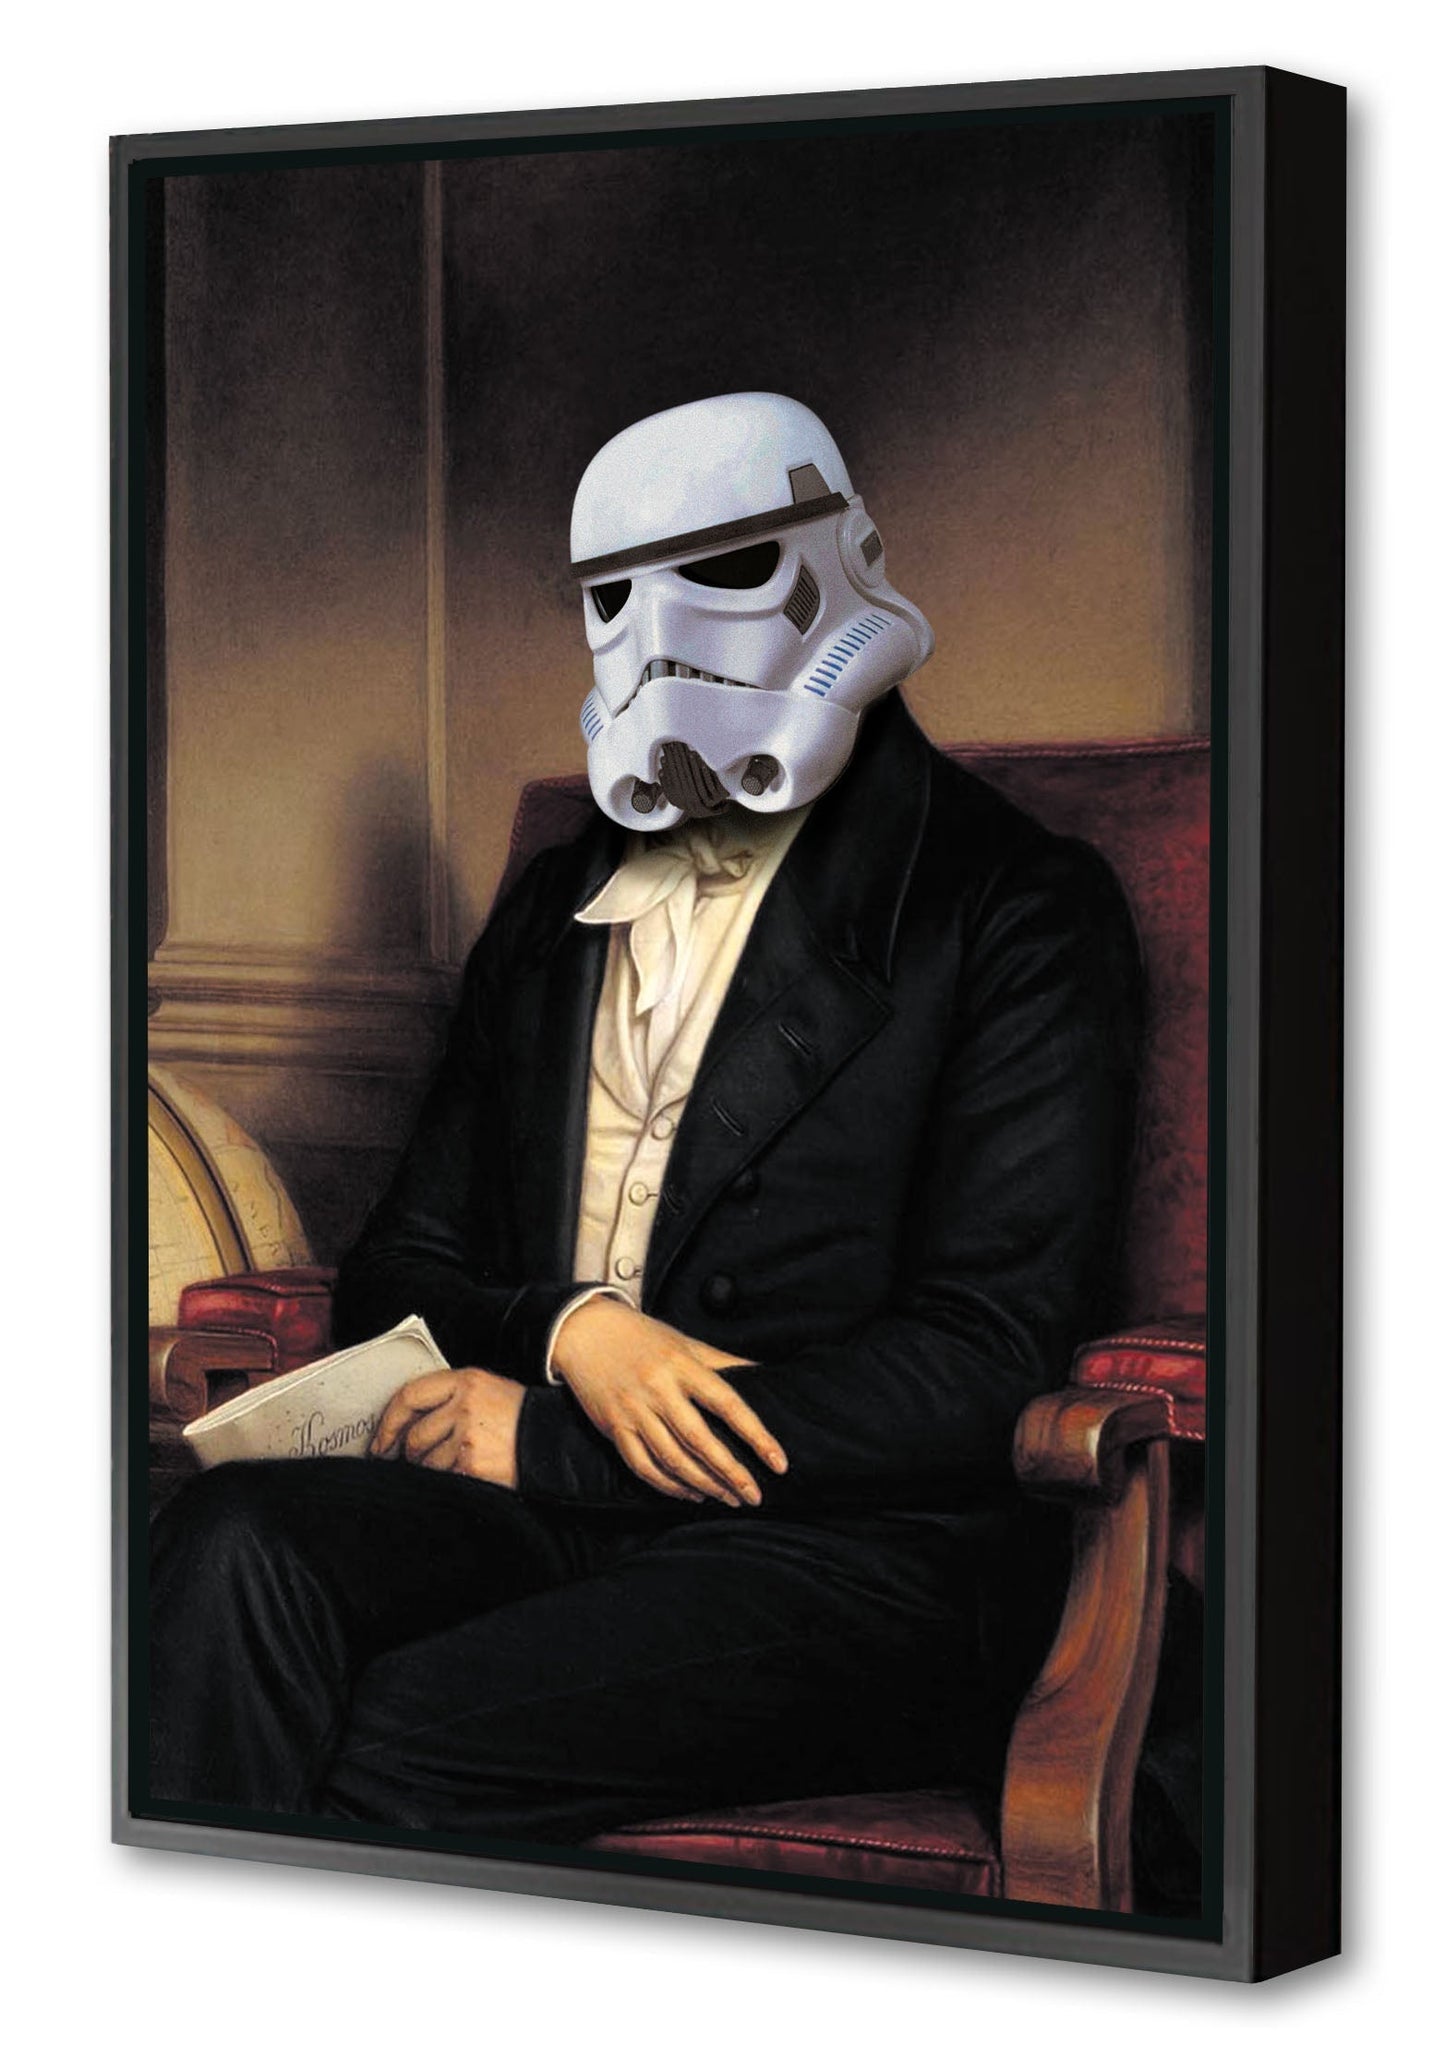 Stormtrooper-historical, print-Canvas Print with Box Frame-40 x 60 cm-BLUE SHAKER